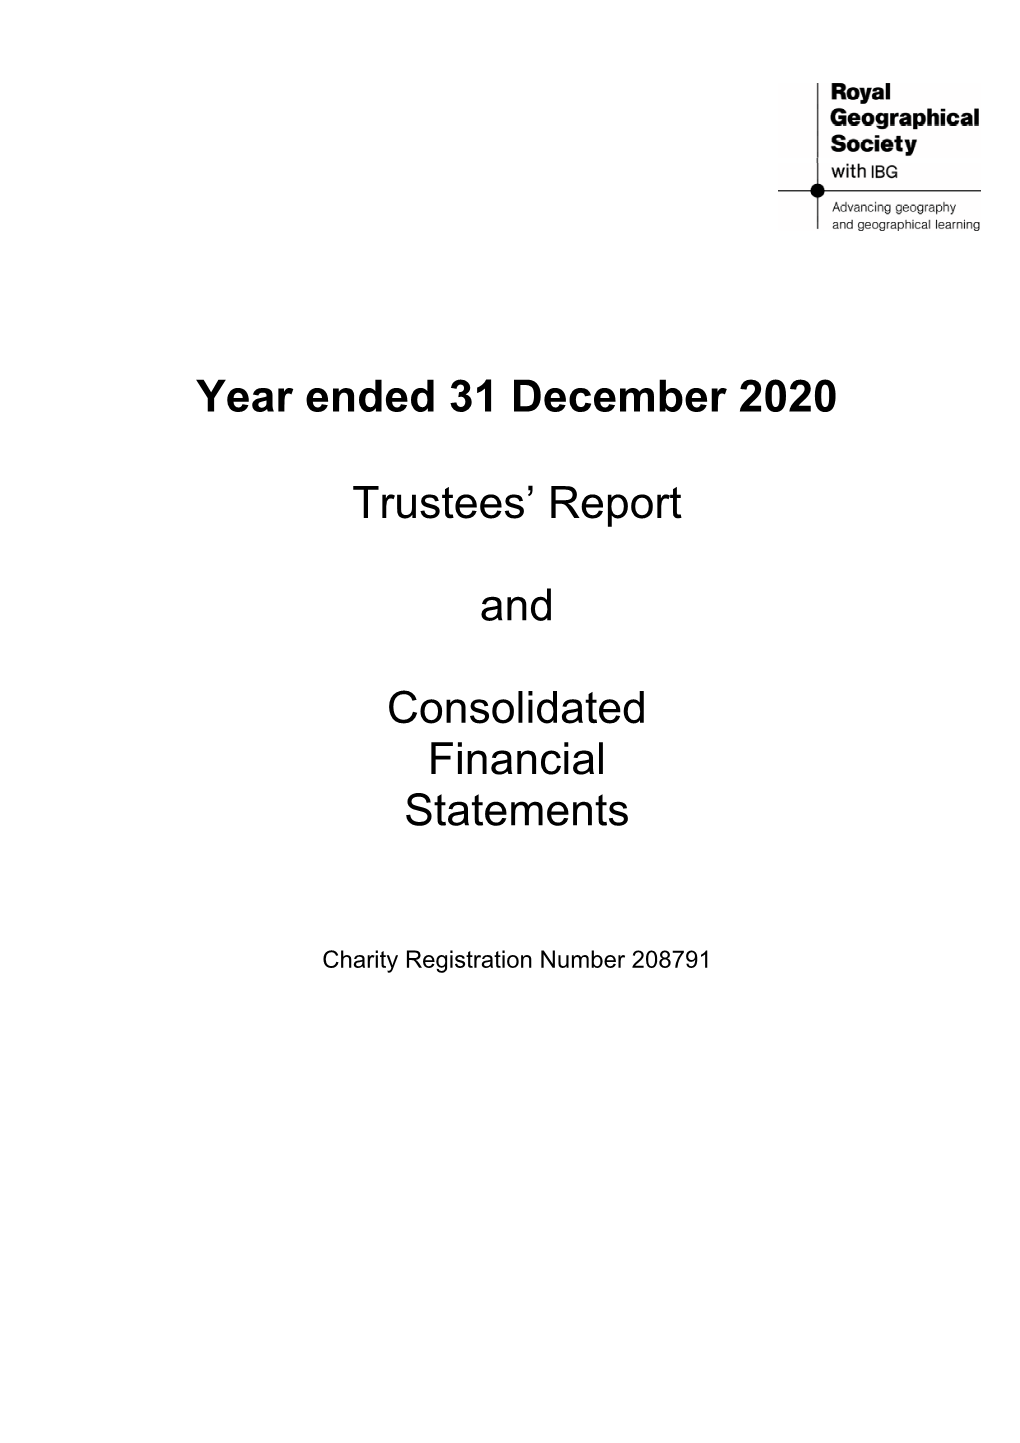 Year Ended 31 December 2020 Trustees' Report and Consolidated Financial Statements